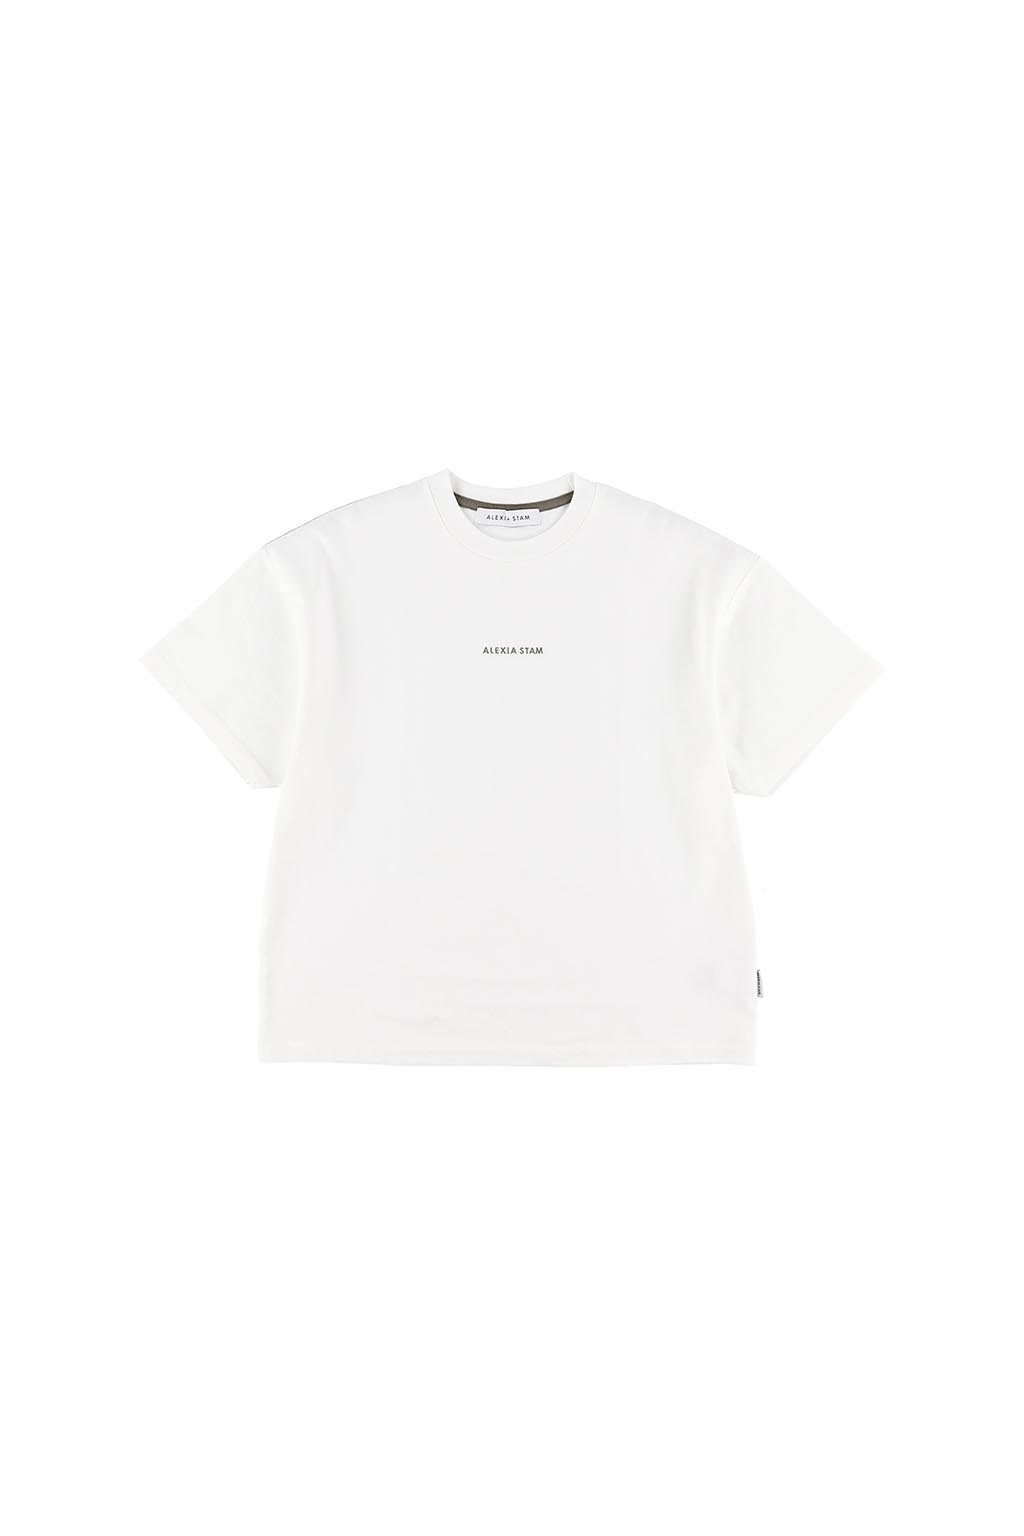 Contrast Embroidery Logo Tee Brown2